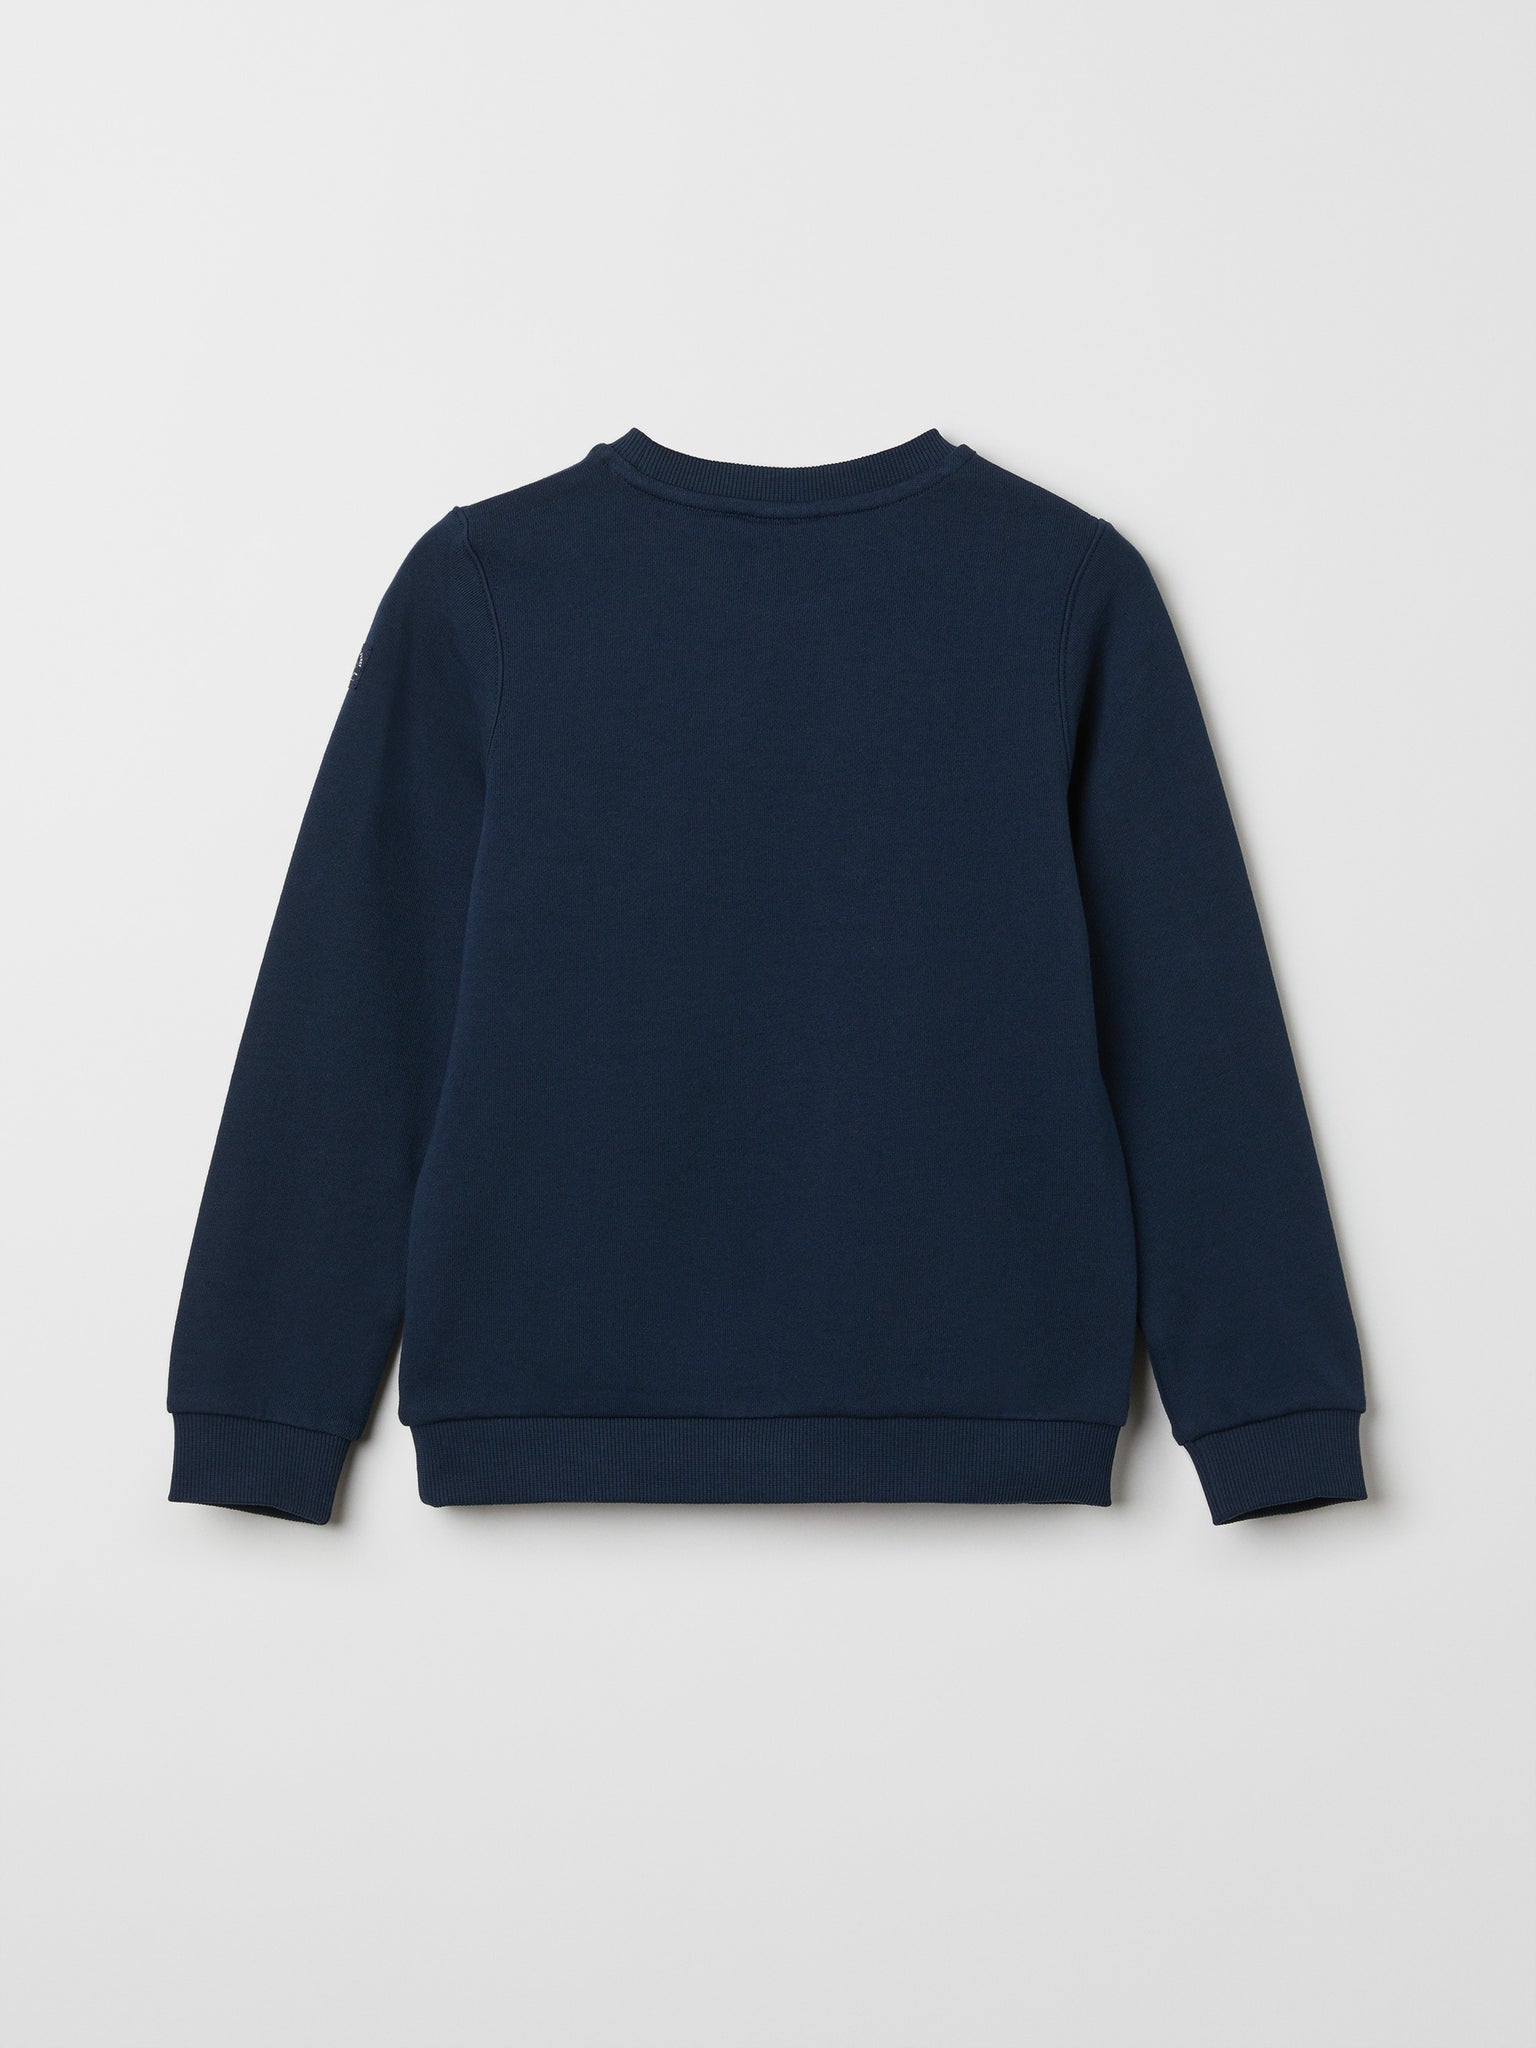 Scandi Organic Cotton Kids Sweatshirt from the Polarn O. Pyret kidswear collection. Ethically produced kids clothing.